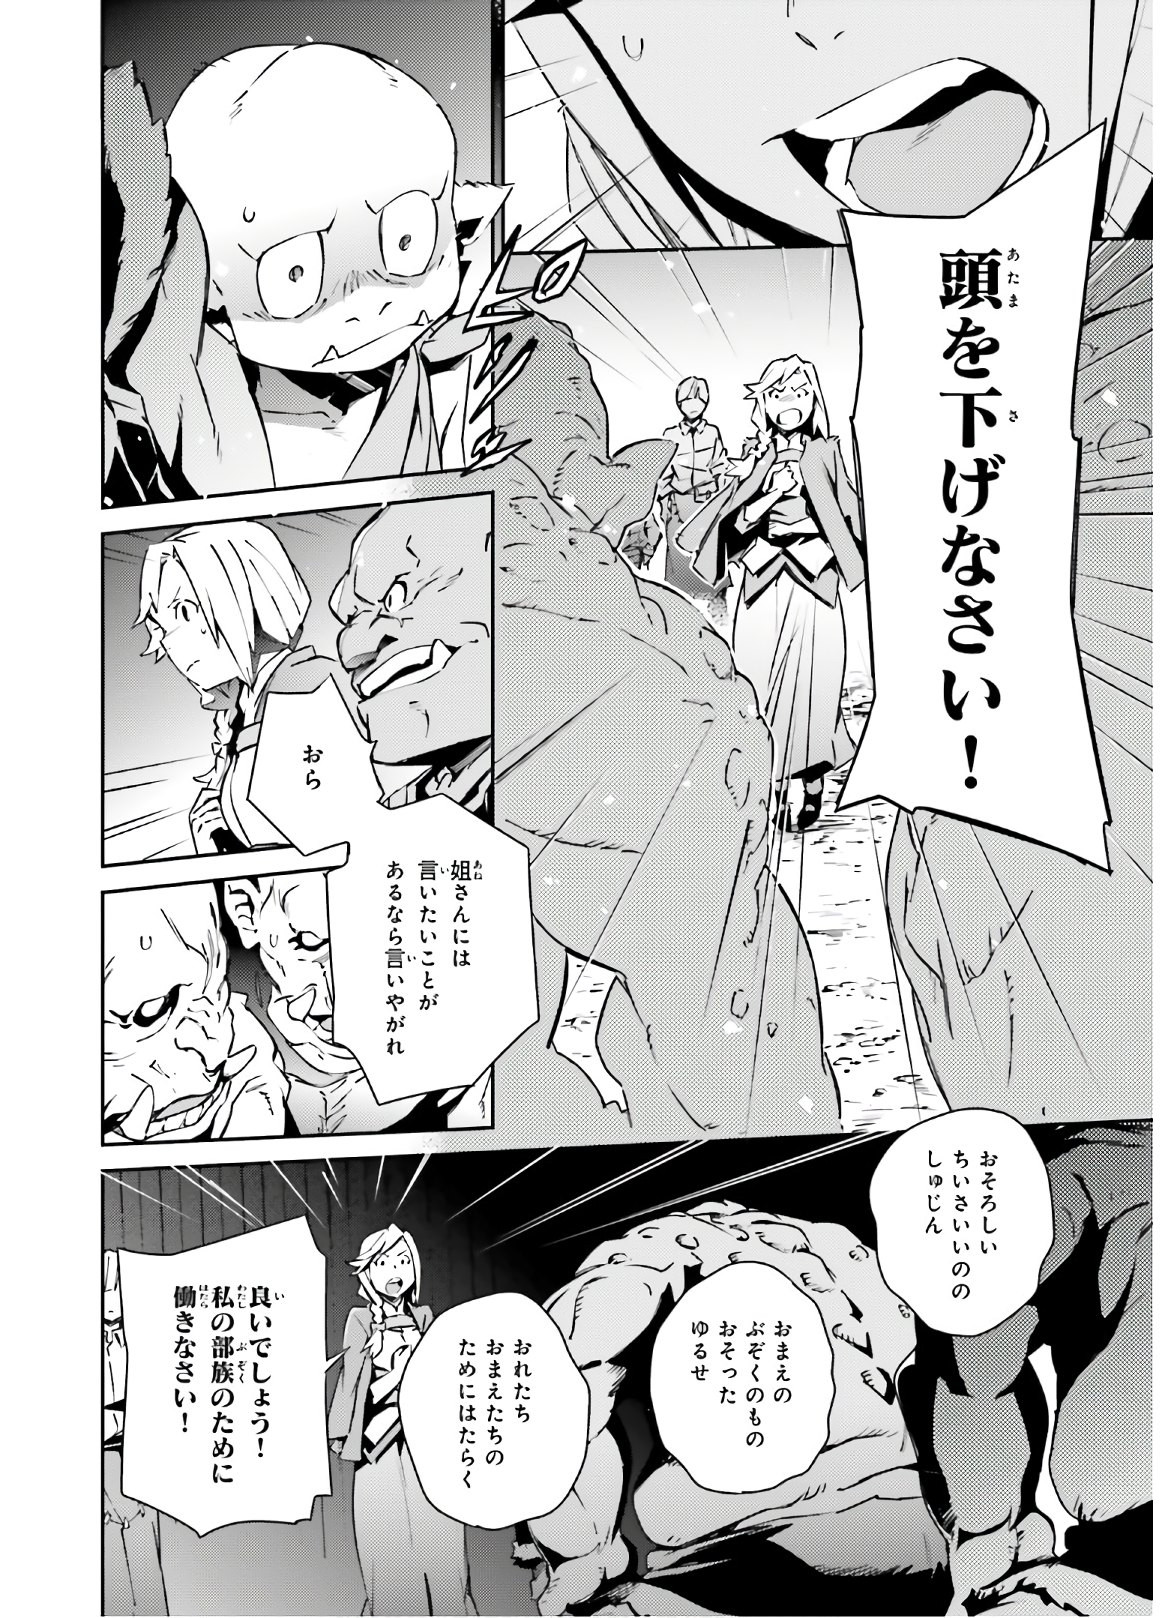 Overlord - Chapter 56 - Page 4